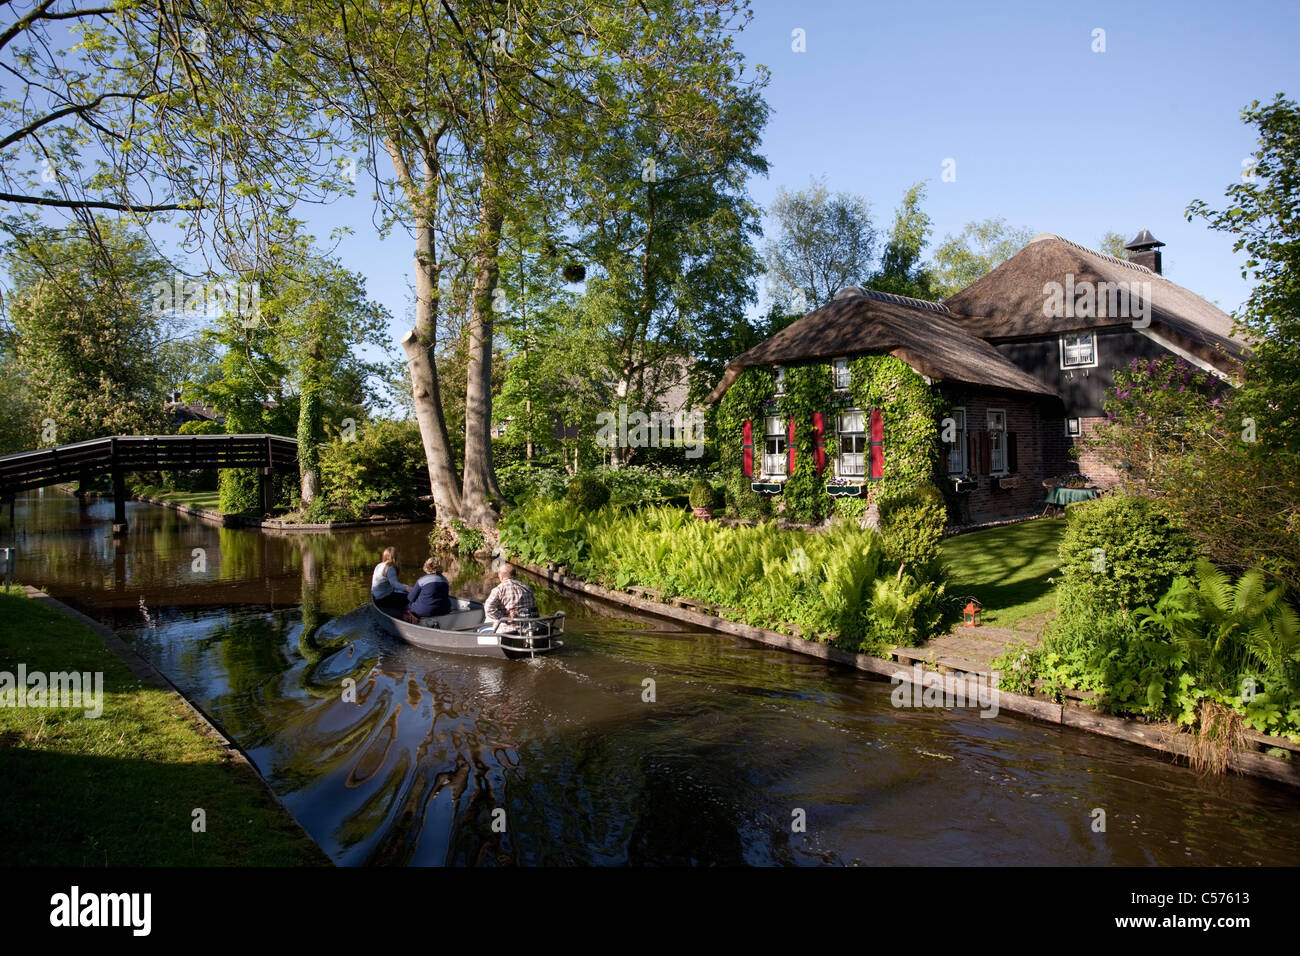 The Netherlands, Giethoorn, Village with almost only waterways. Tourists enjoying boat ride. Stock Photo